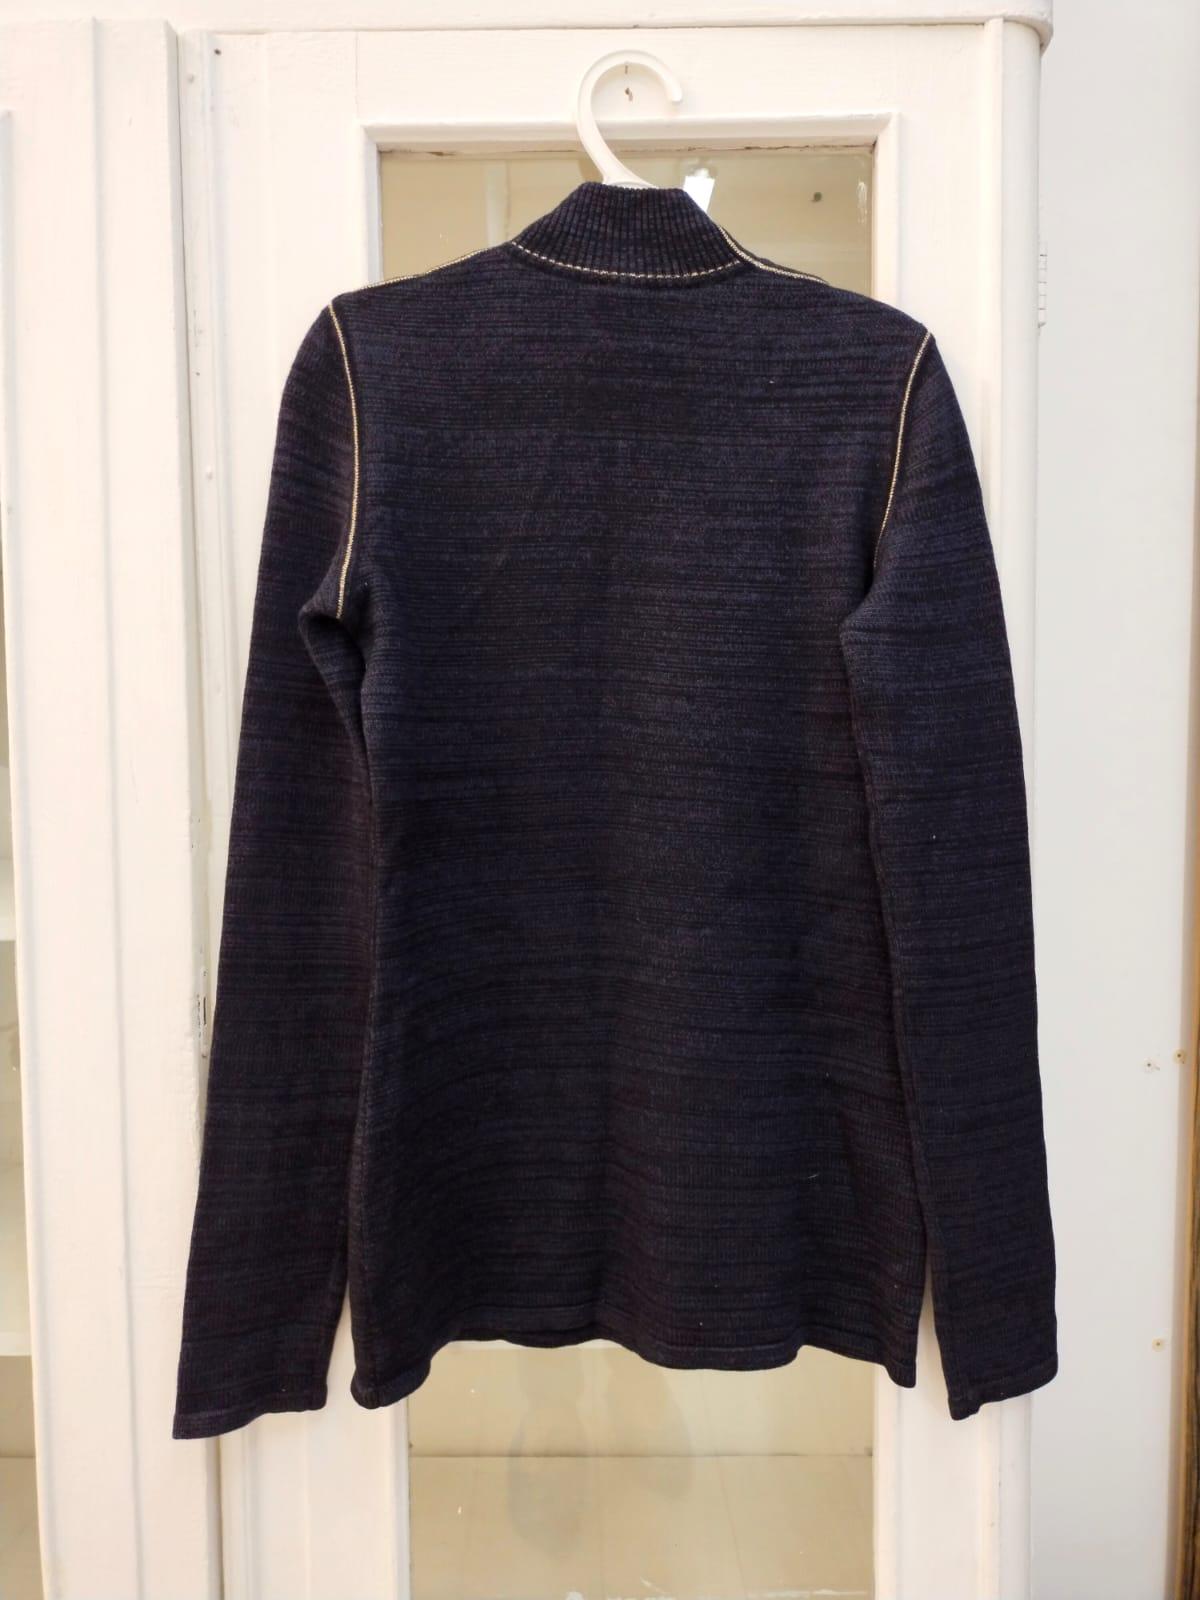 CHANEL 09A CC Moscow – Paris 2009 Karl Lagerfeld sweater pullover rare For Sale 16